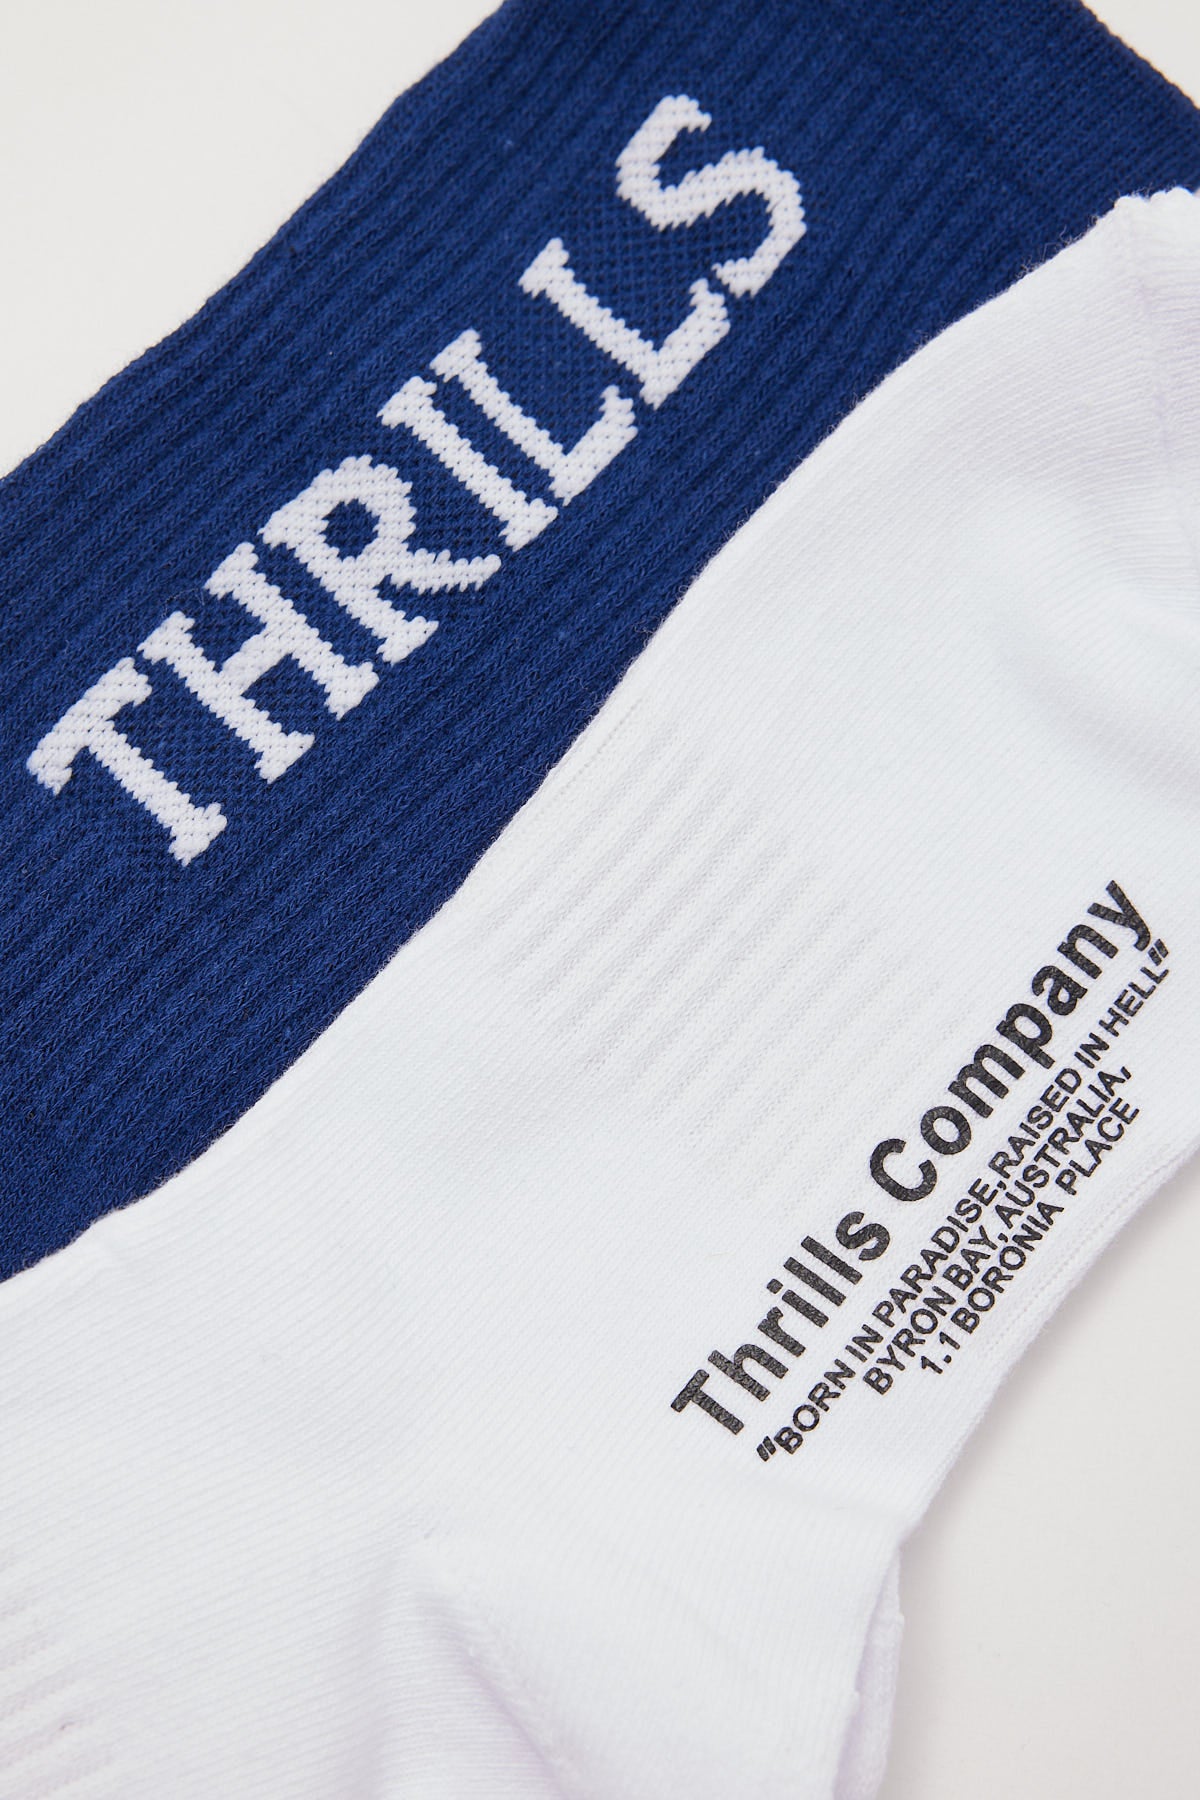 Thrills Chariot 2 Pack Sock White/Eclipse